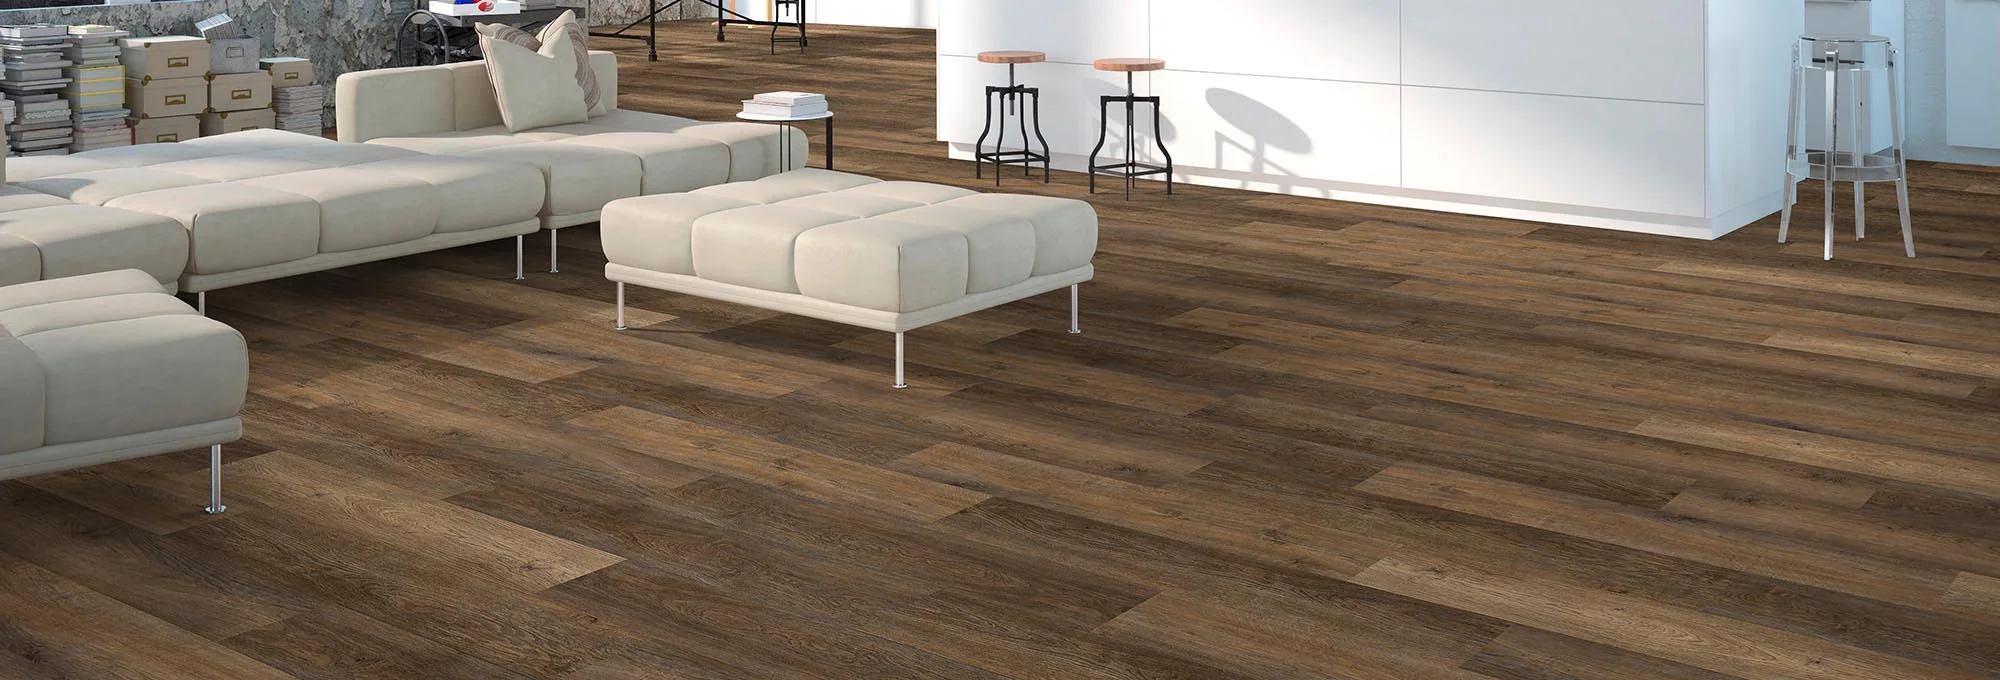 Shop Flooring Products from 3Kings CarpetsPlus COLORTILE in Ft. Wayne, IN